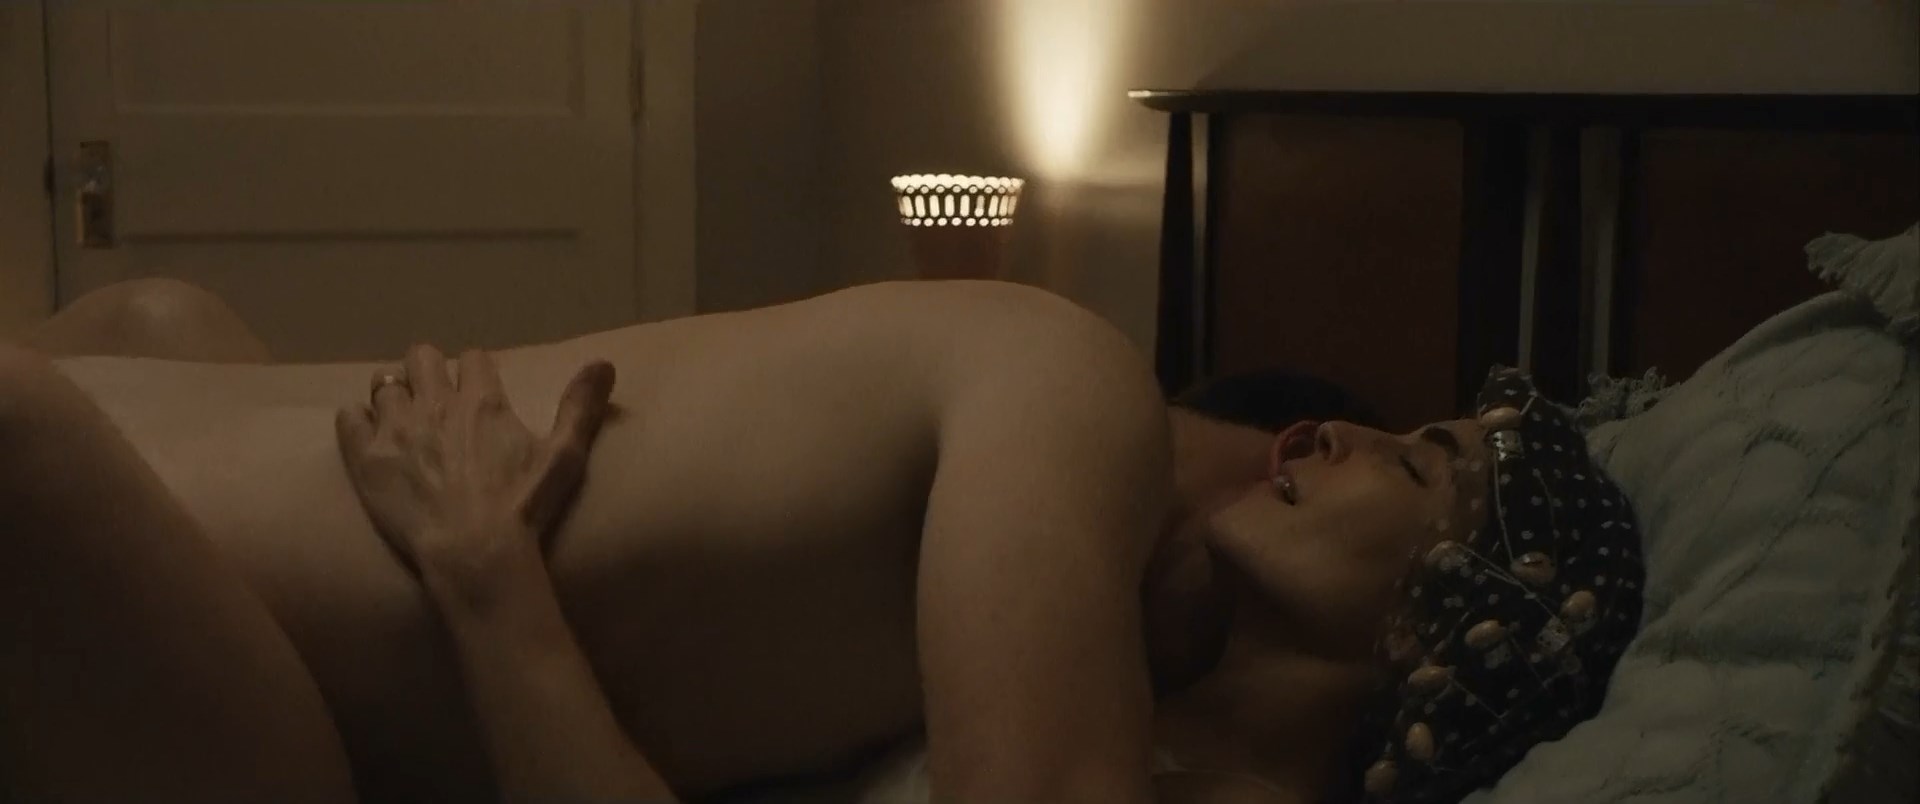 Noomi Rapace Nude. 